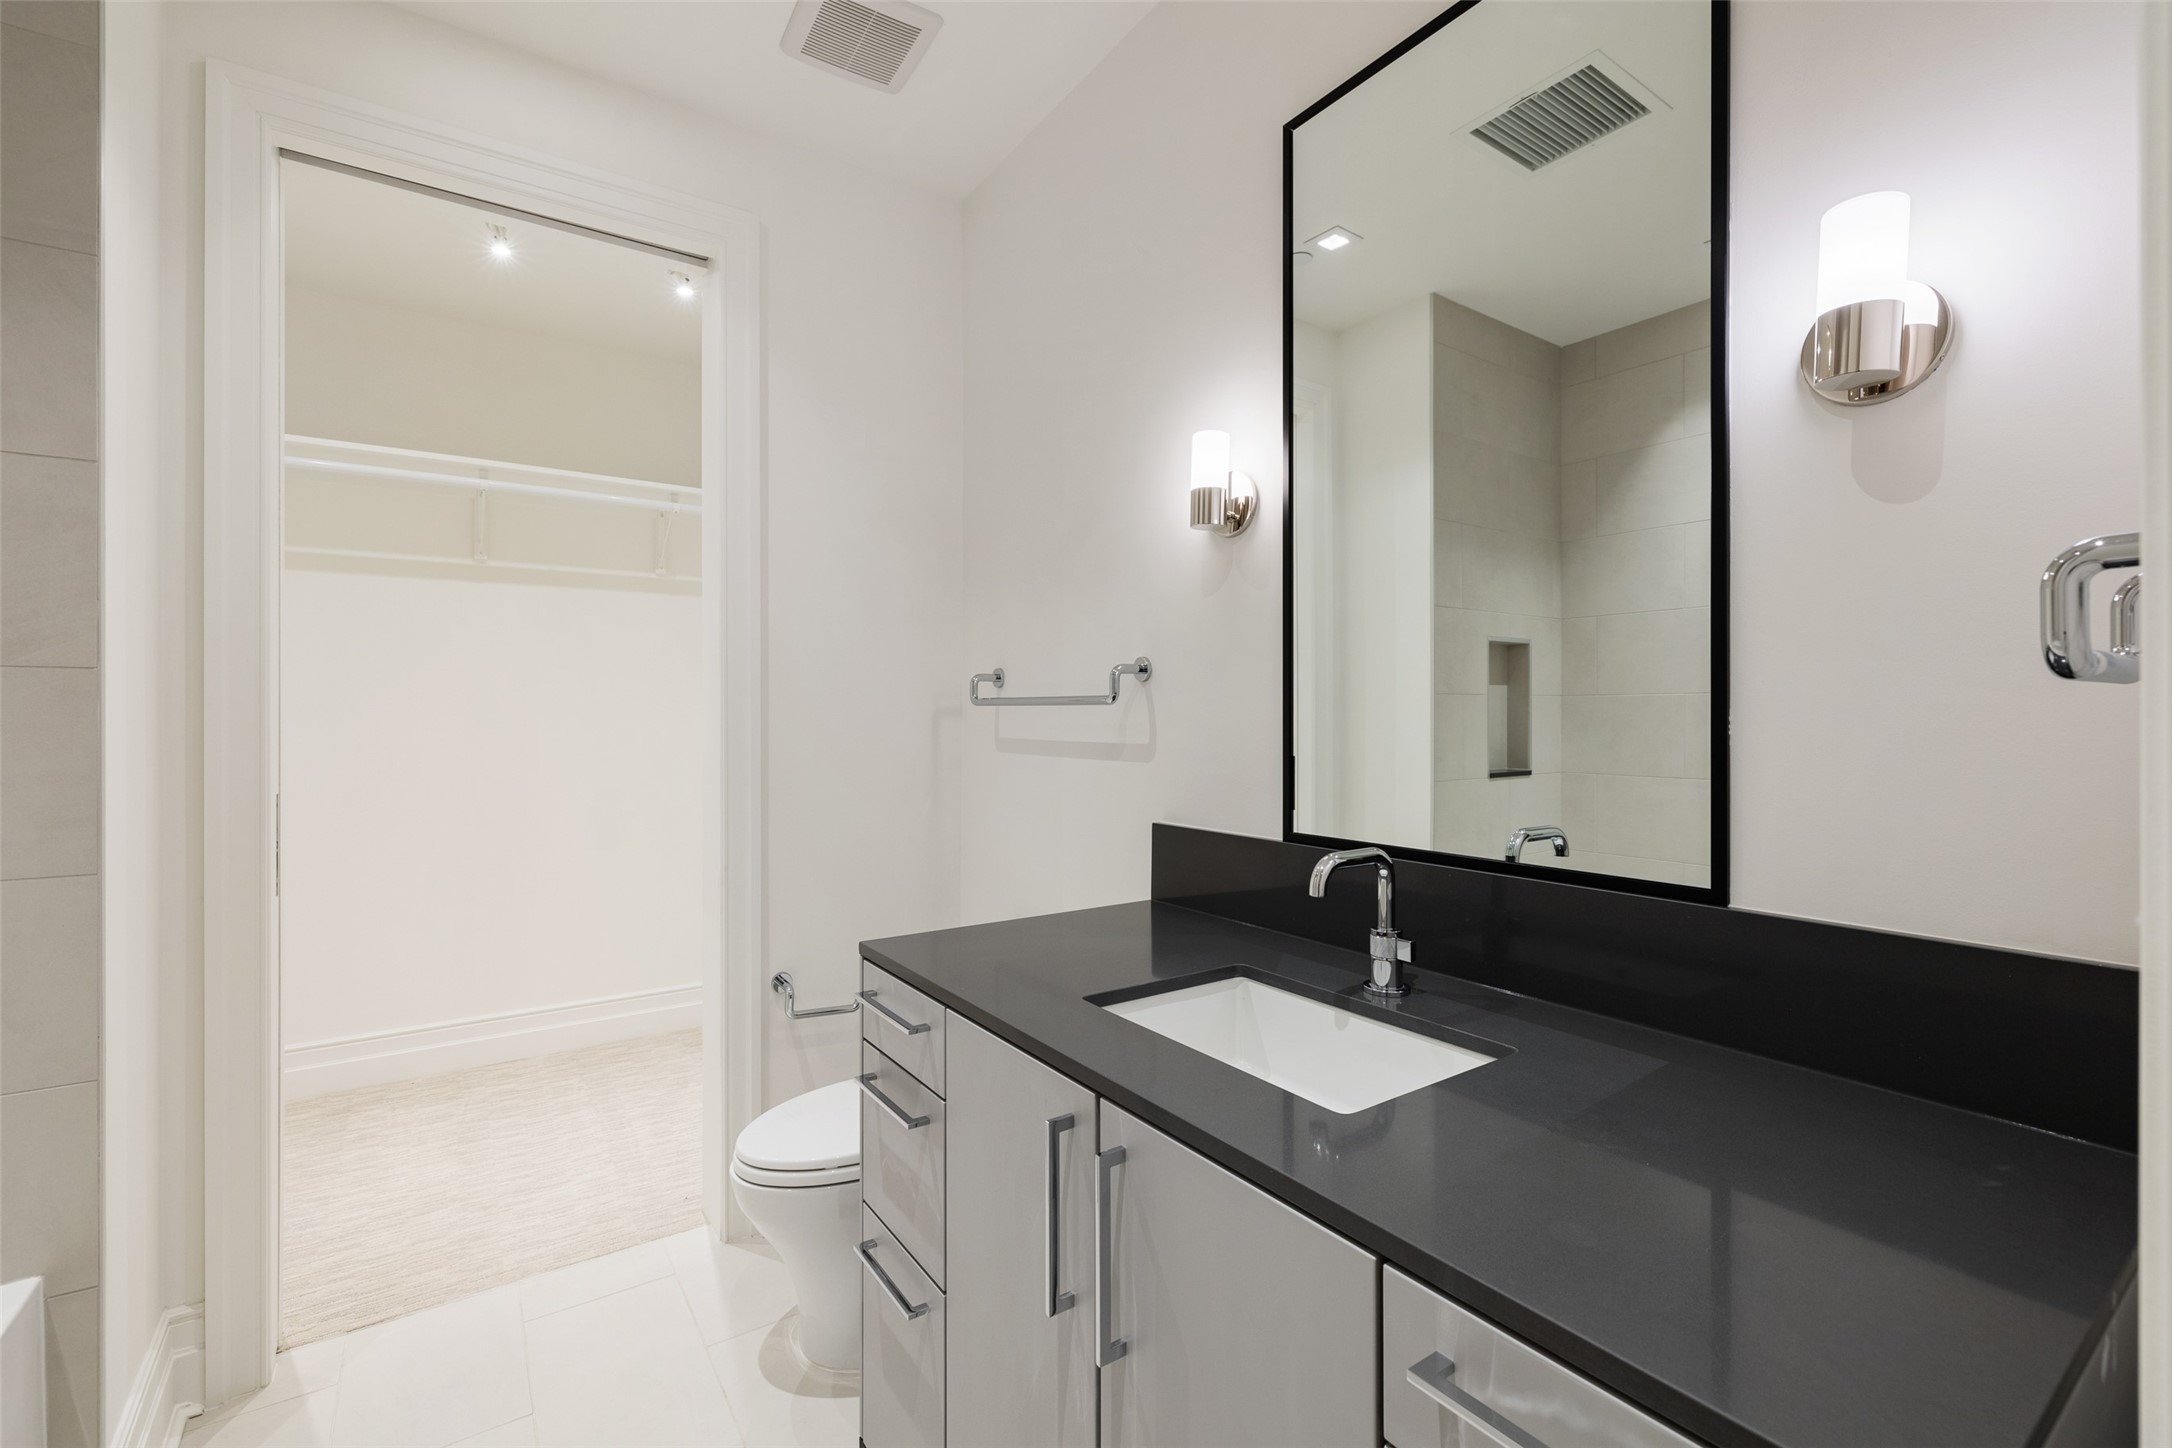 One of the Secondary En-suite Bathrooms features a Soaker Tub and Shower Combination with walk-in Closet.